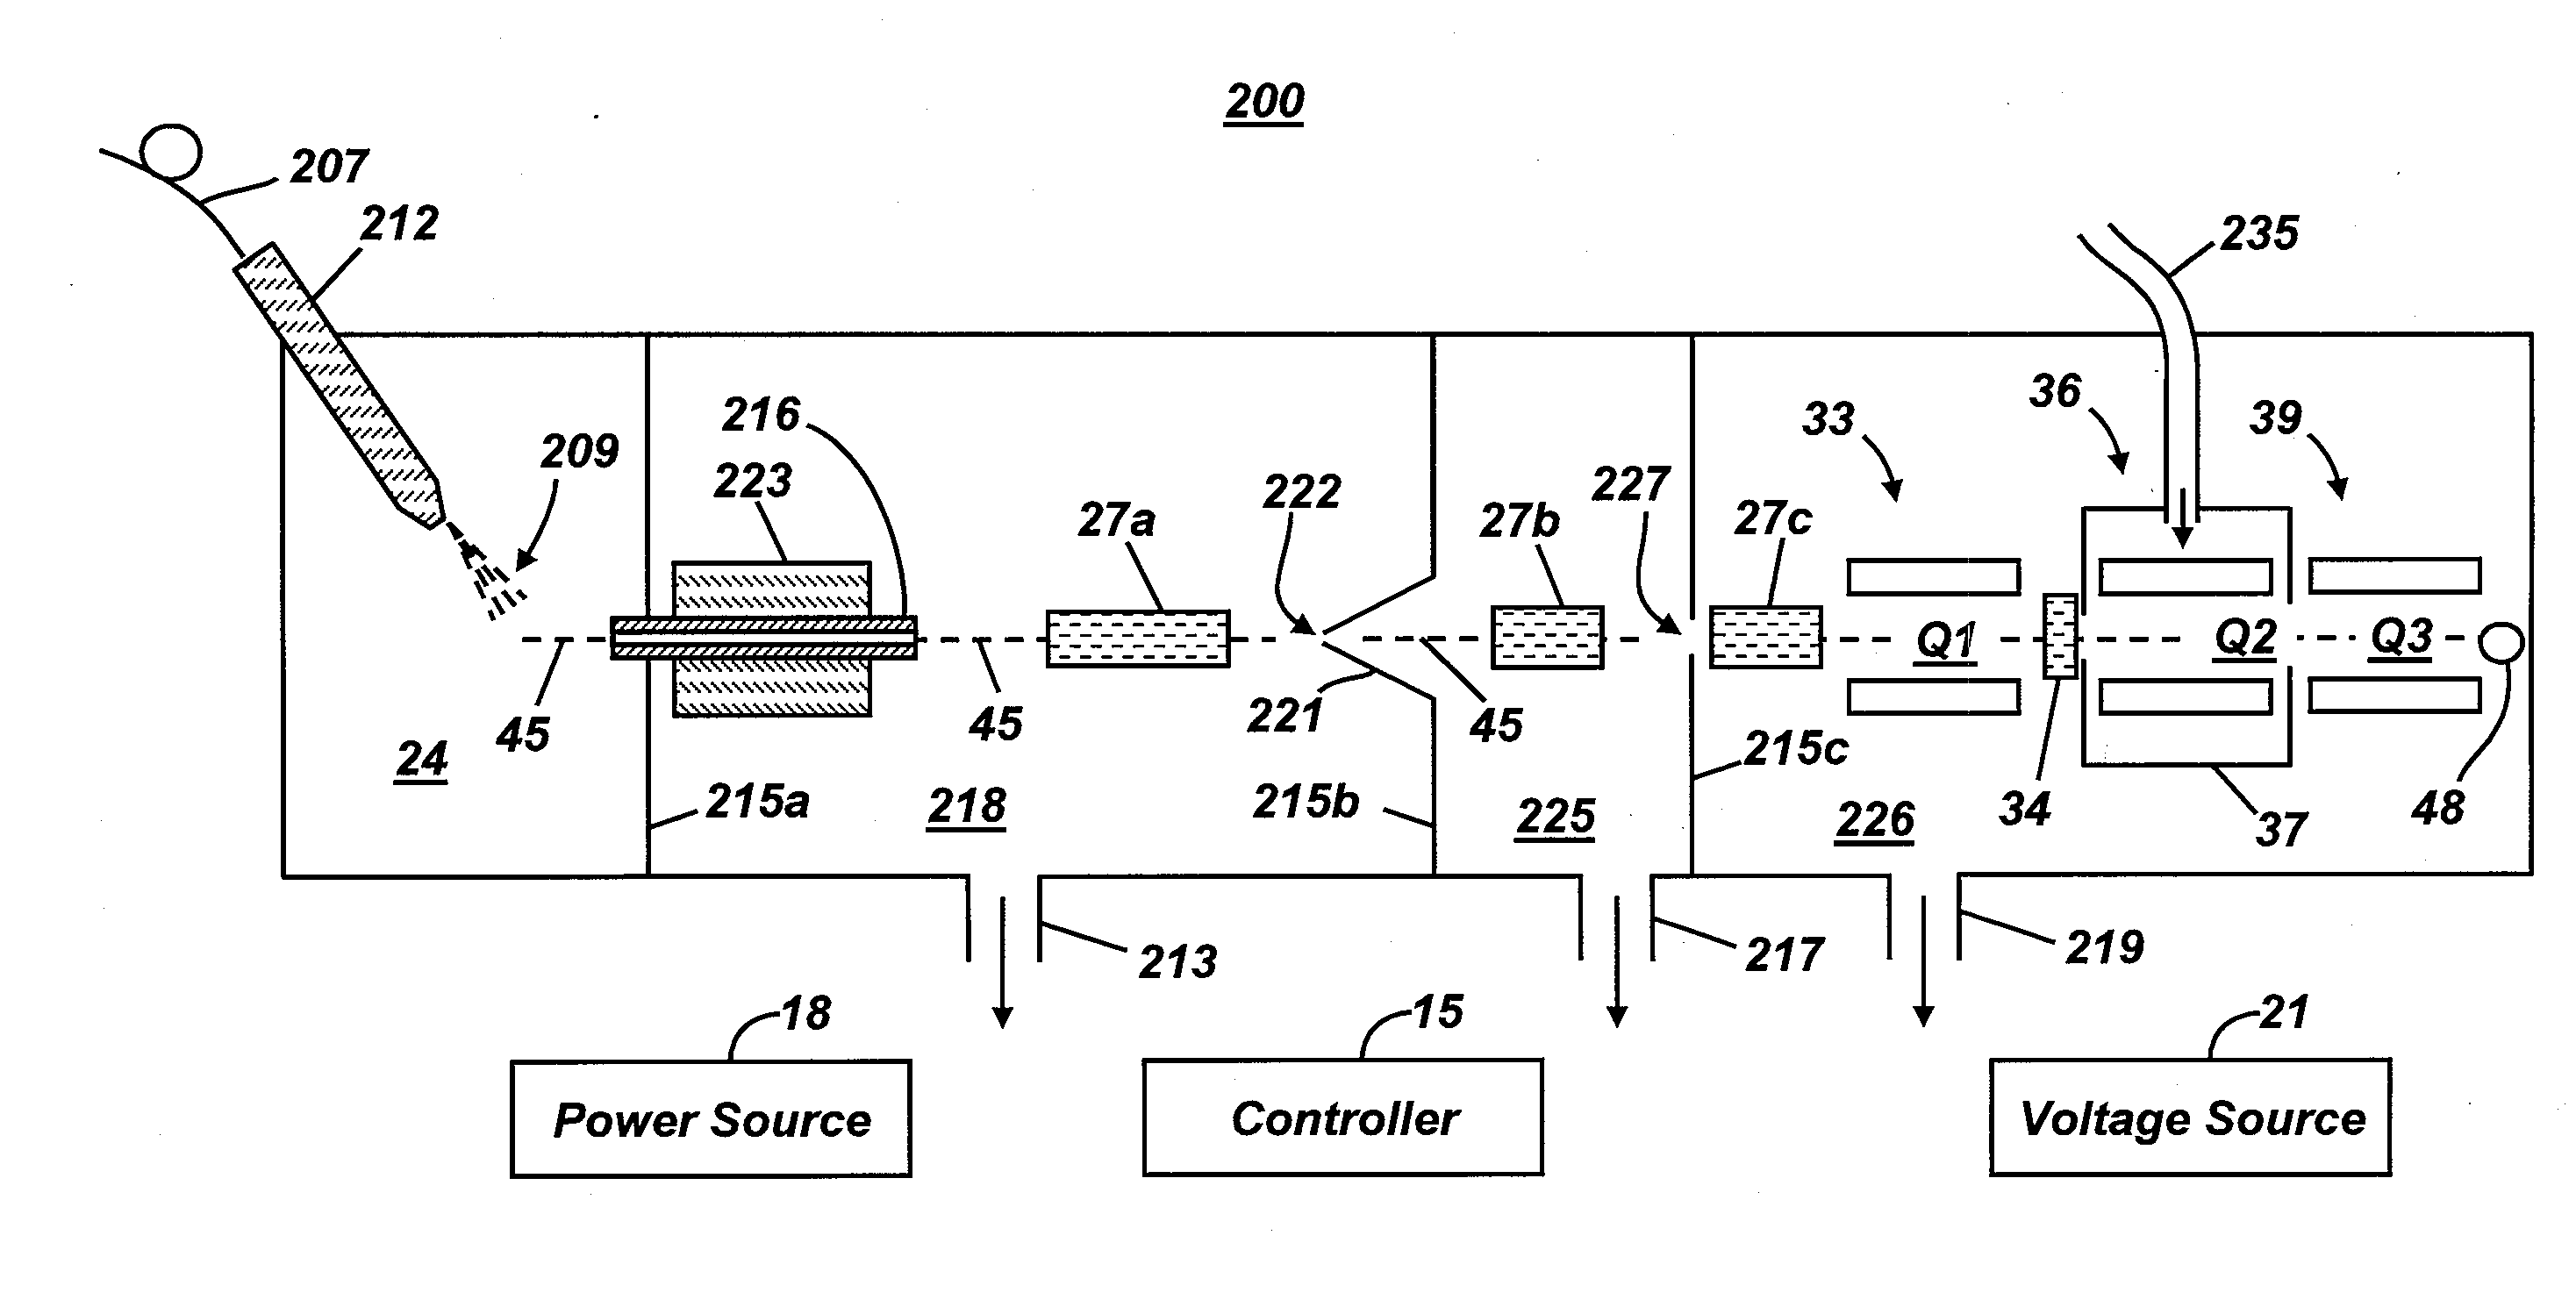 Method for Automated Checking and Adjustment of Mass Spectrometer Calibration